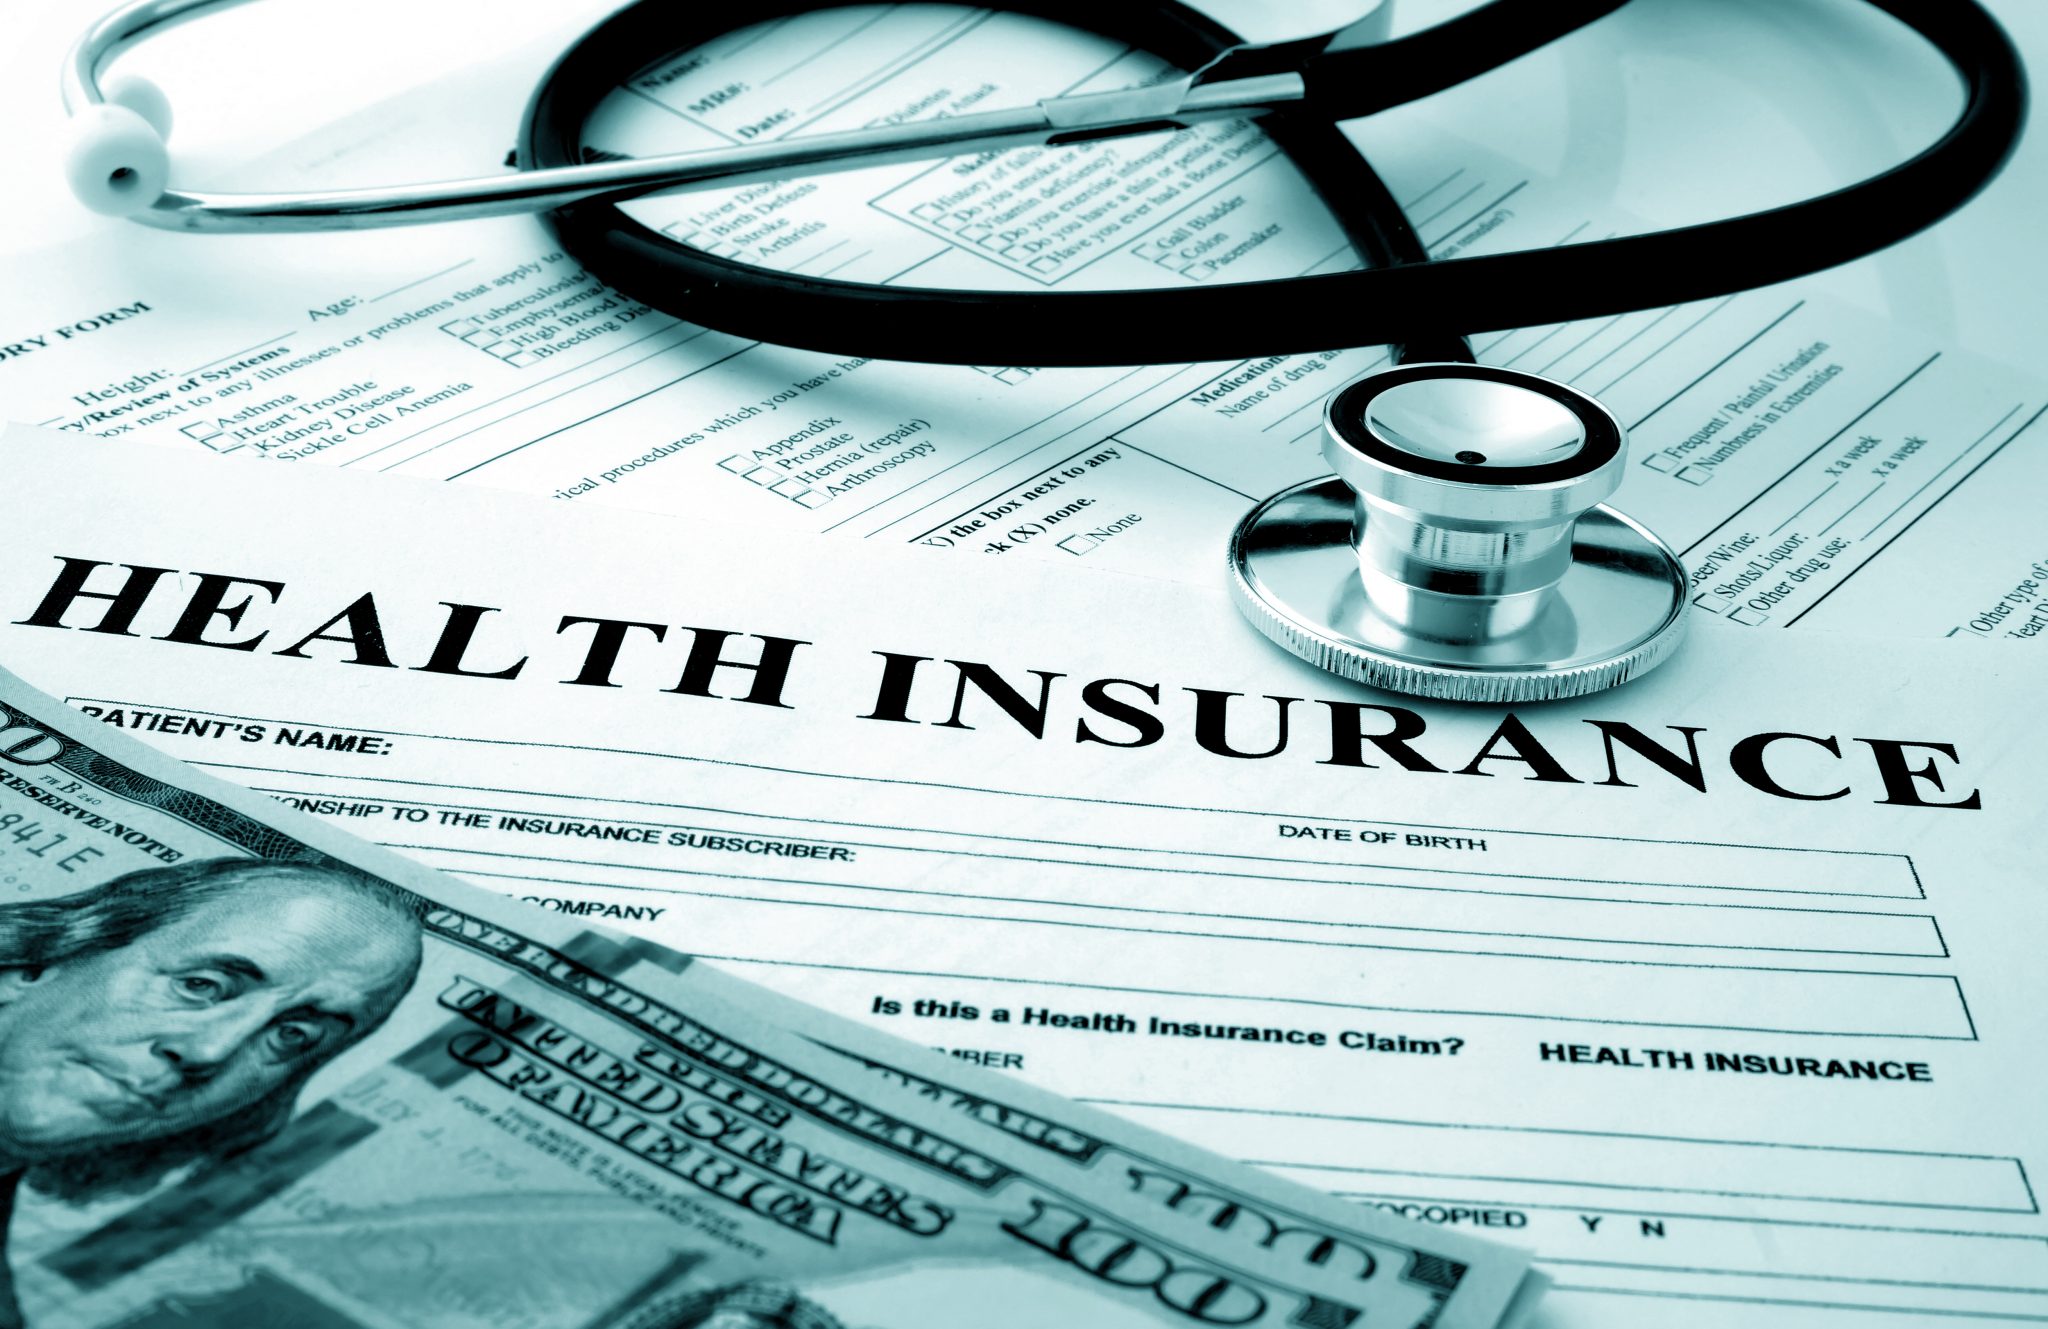 Health insurance form with dollars and stethoscope